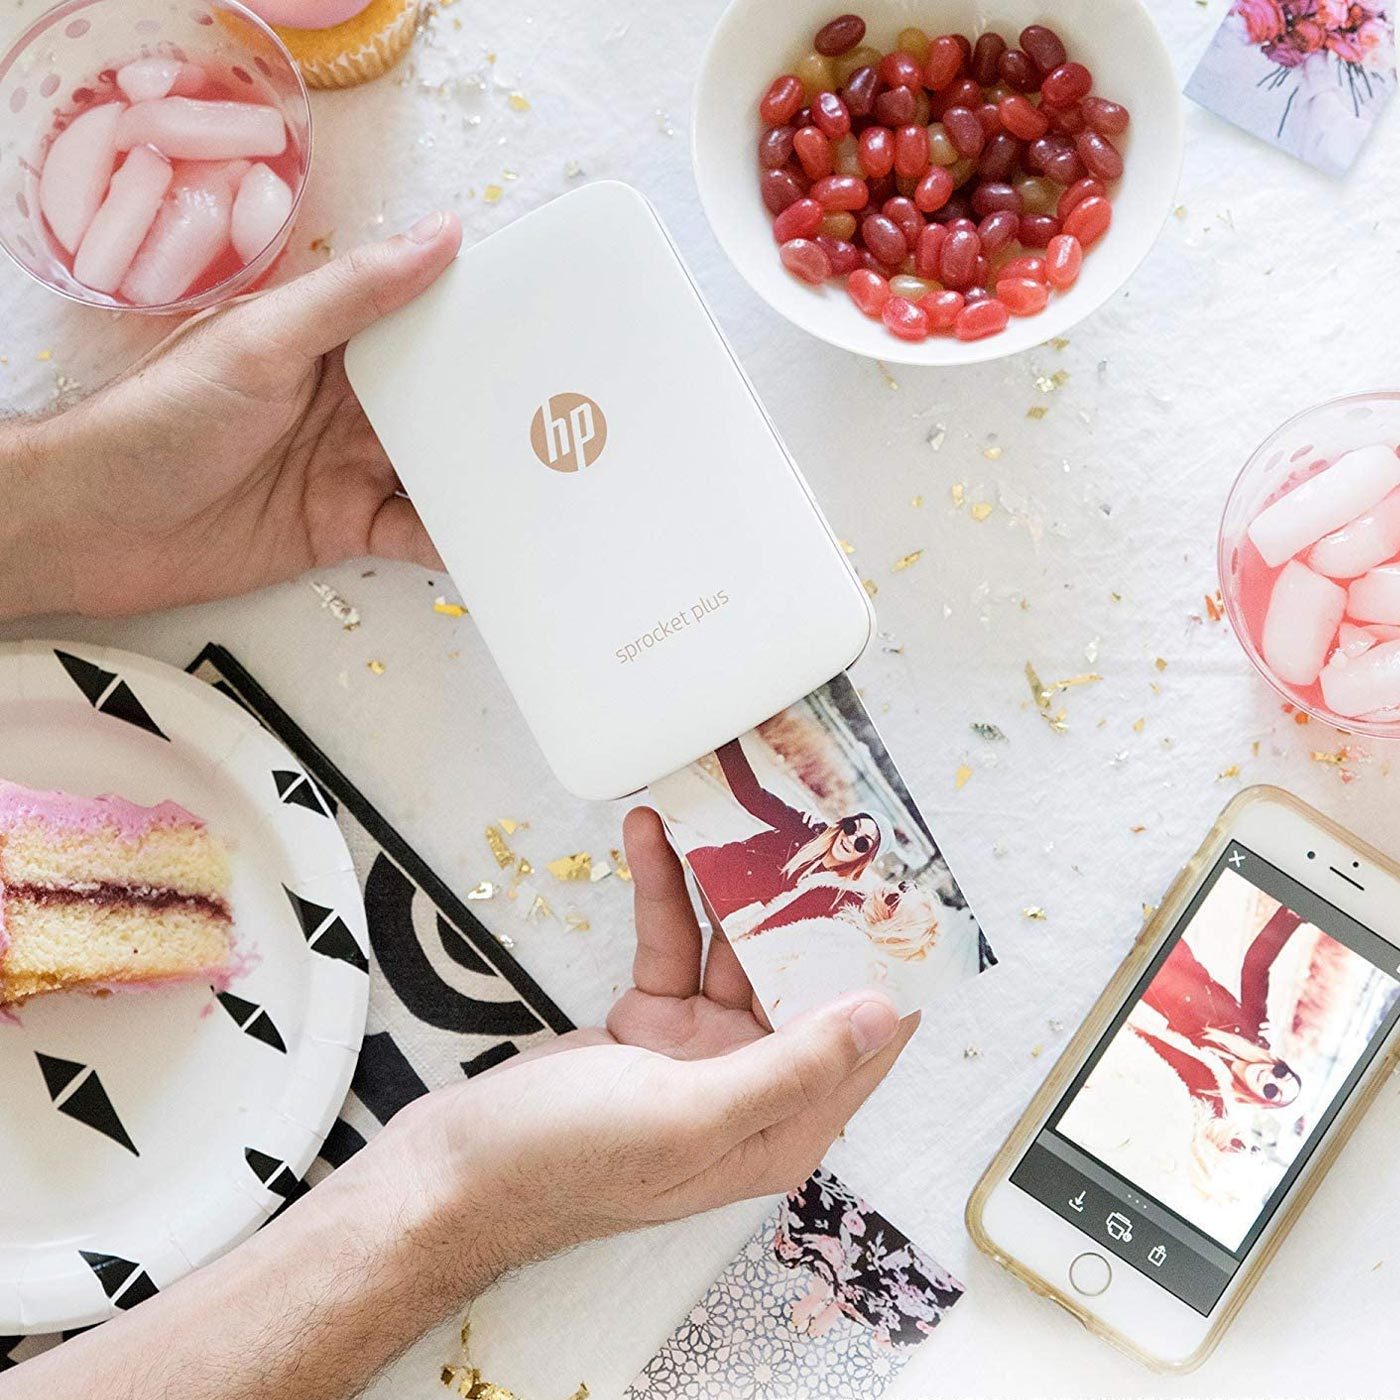 <p class="p1">Smartphone photography makes capturing memories easier than ever, and this <a href="https://www.amazon.com/HP-Sprocket-Instant-Printer-Sticky-Backed/dp/B076SHP2S6/" rel="noopener"><span>HP Sprocket portable printer</span></a> makes it convenient to print pictures during one's travels. The traveler in your life can use this gift to have instant prints of their adventures in real time to share with fellow travelers or put in their journals. We love that this printer is thin and lightweight, so it's not a burden to carry in a purse or backpack.</p> <p class="listicle-page__cta-button-shop"><a class="shop-btn" href="https://www.amazon.com/HP-Sprocket-Instant-Printer-Sticky-Backed/dp/B076SHP2S6/">Shop Now</a></p>